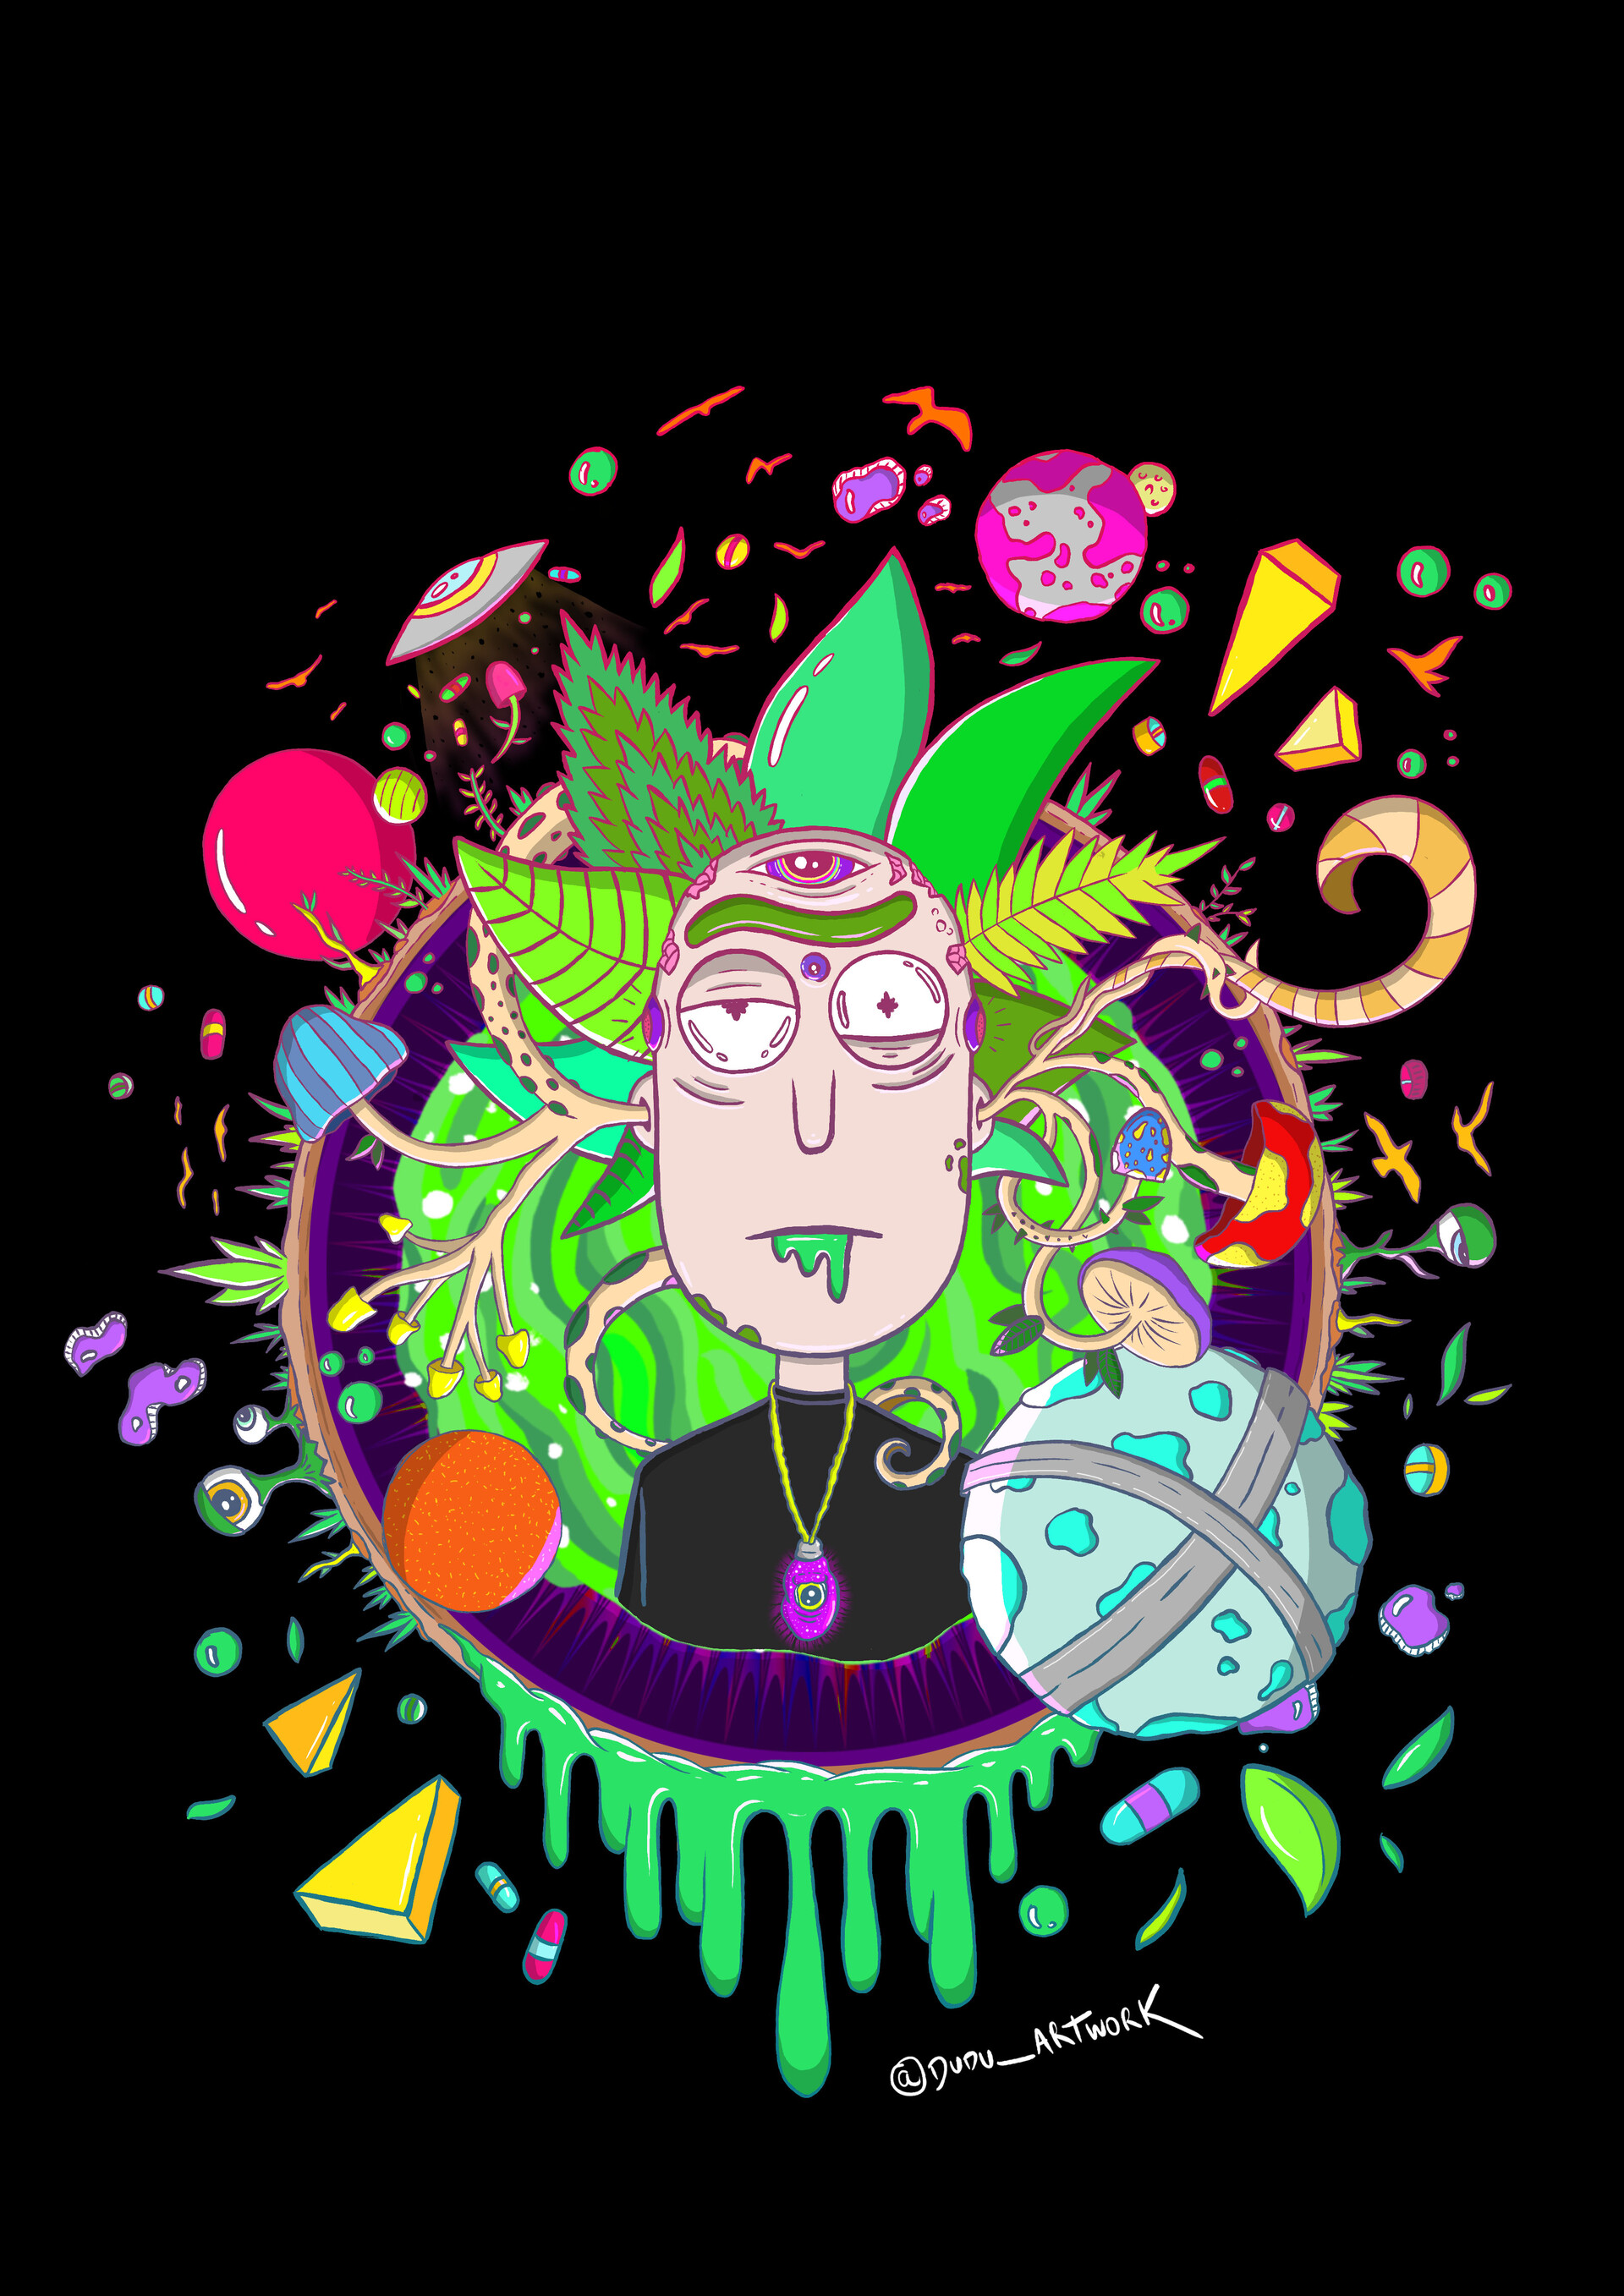 Check out my friend's trippy Rick and Morty art! : woahdude